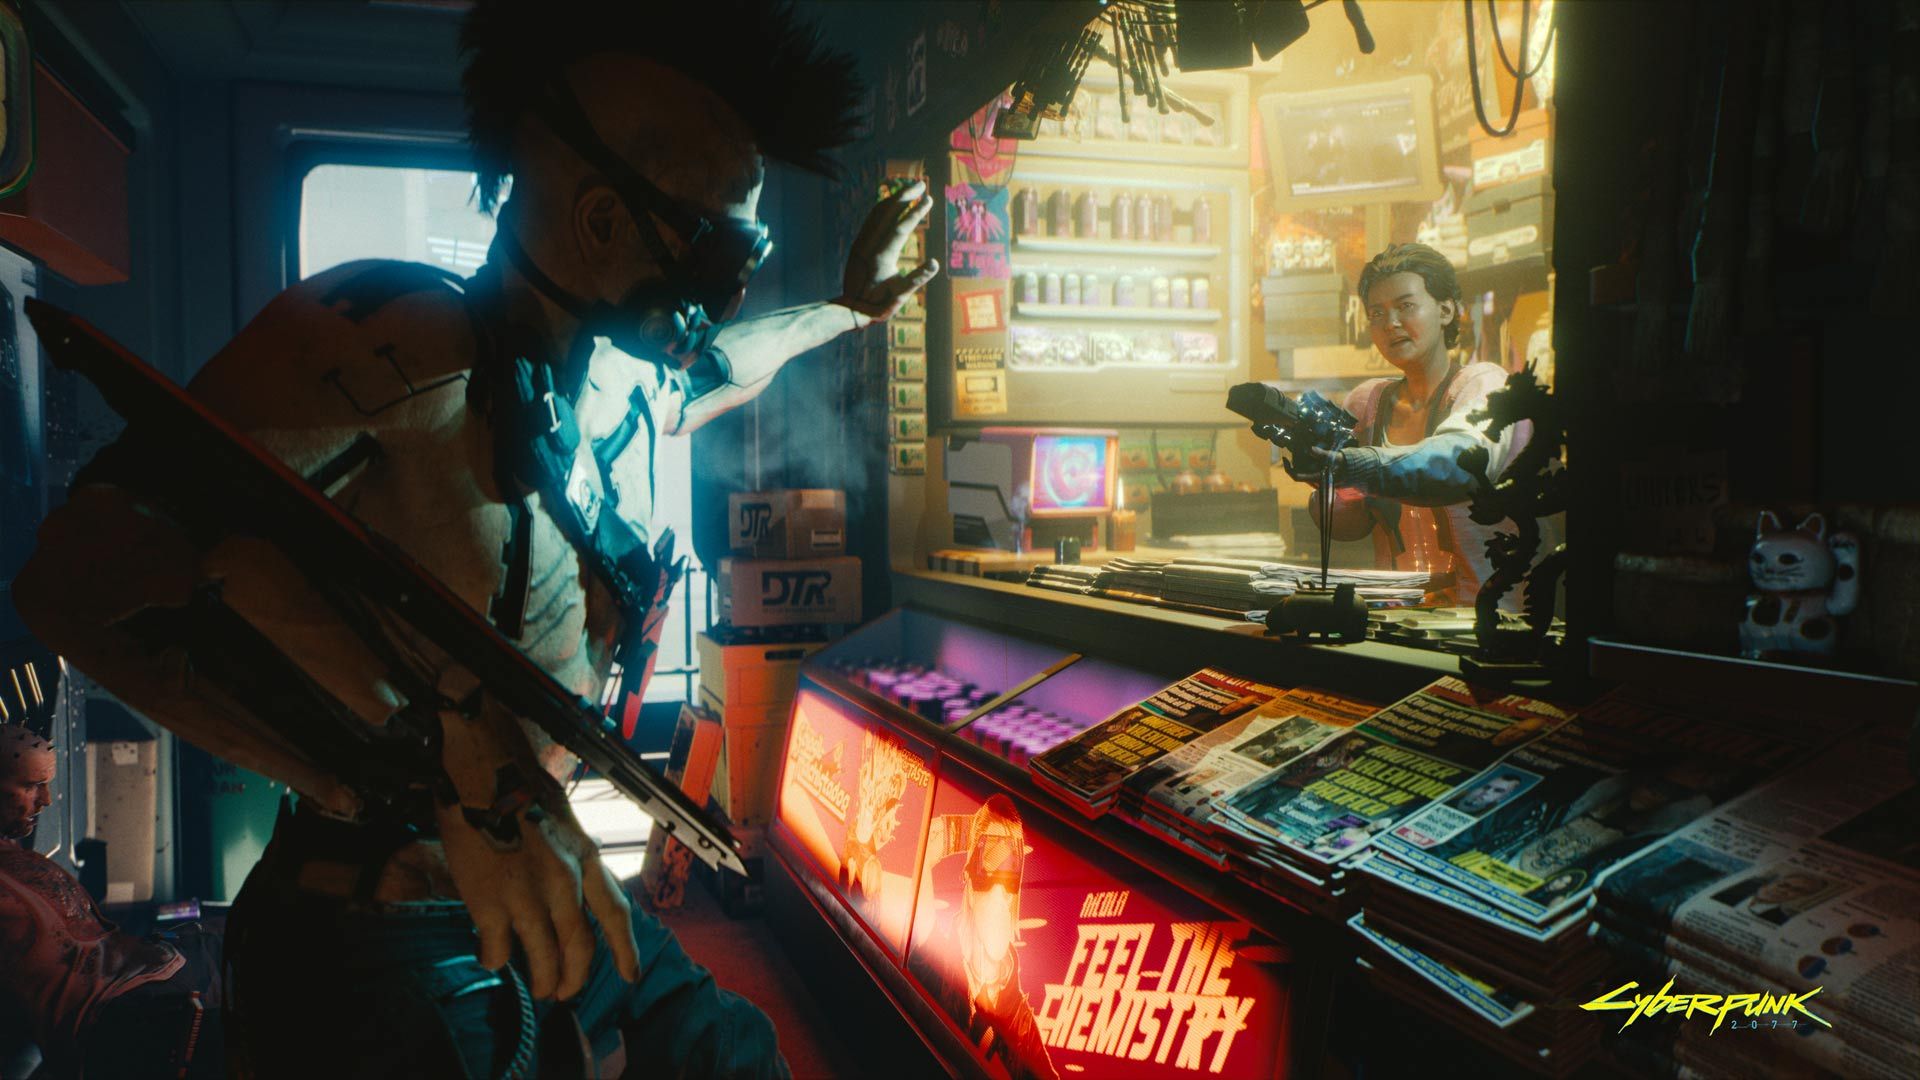 Will there be a Cyberpunk 2077 cookbook? “I mean, it did get a chair”